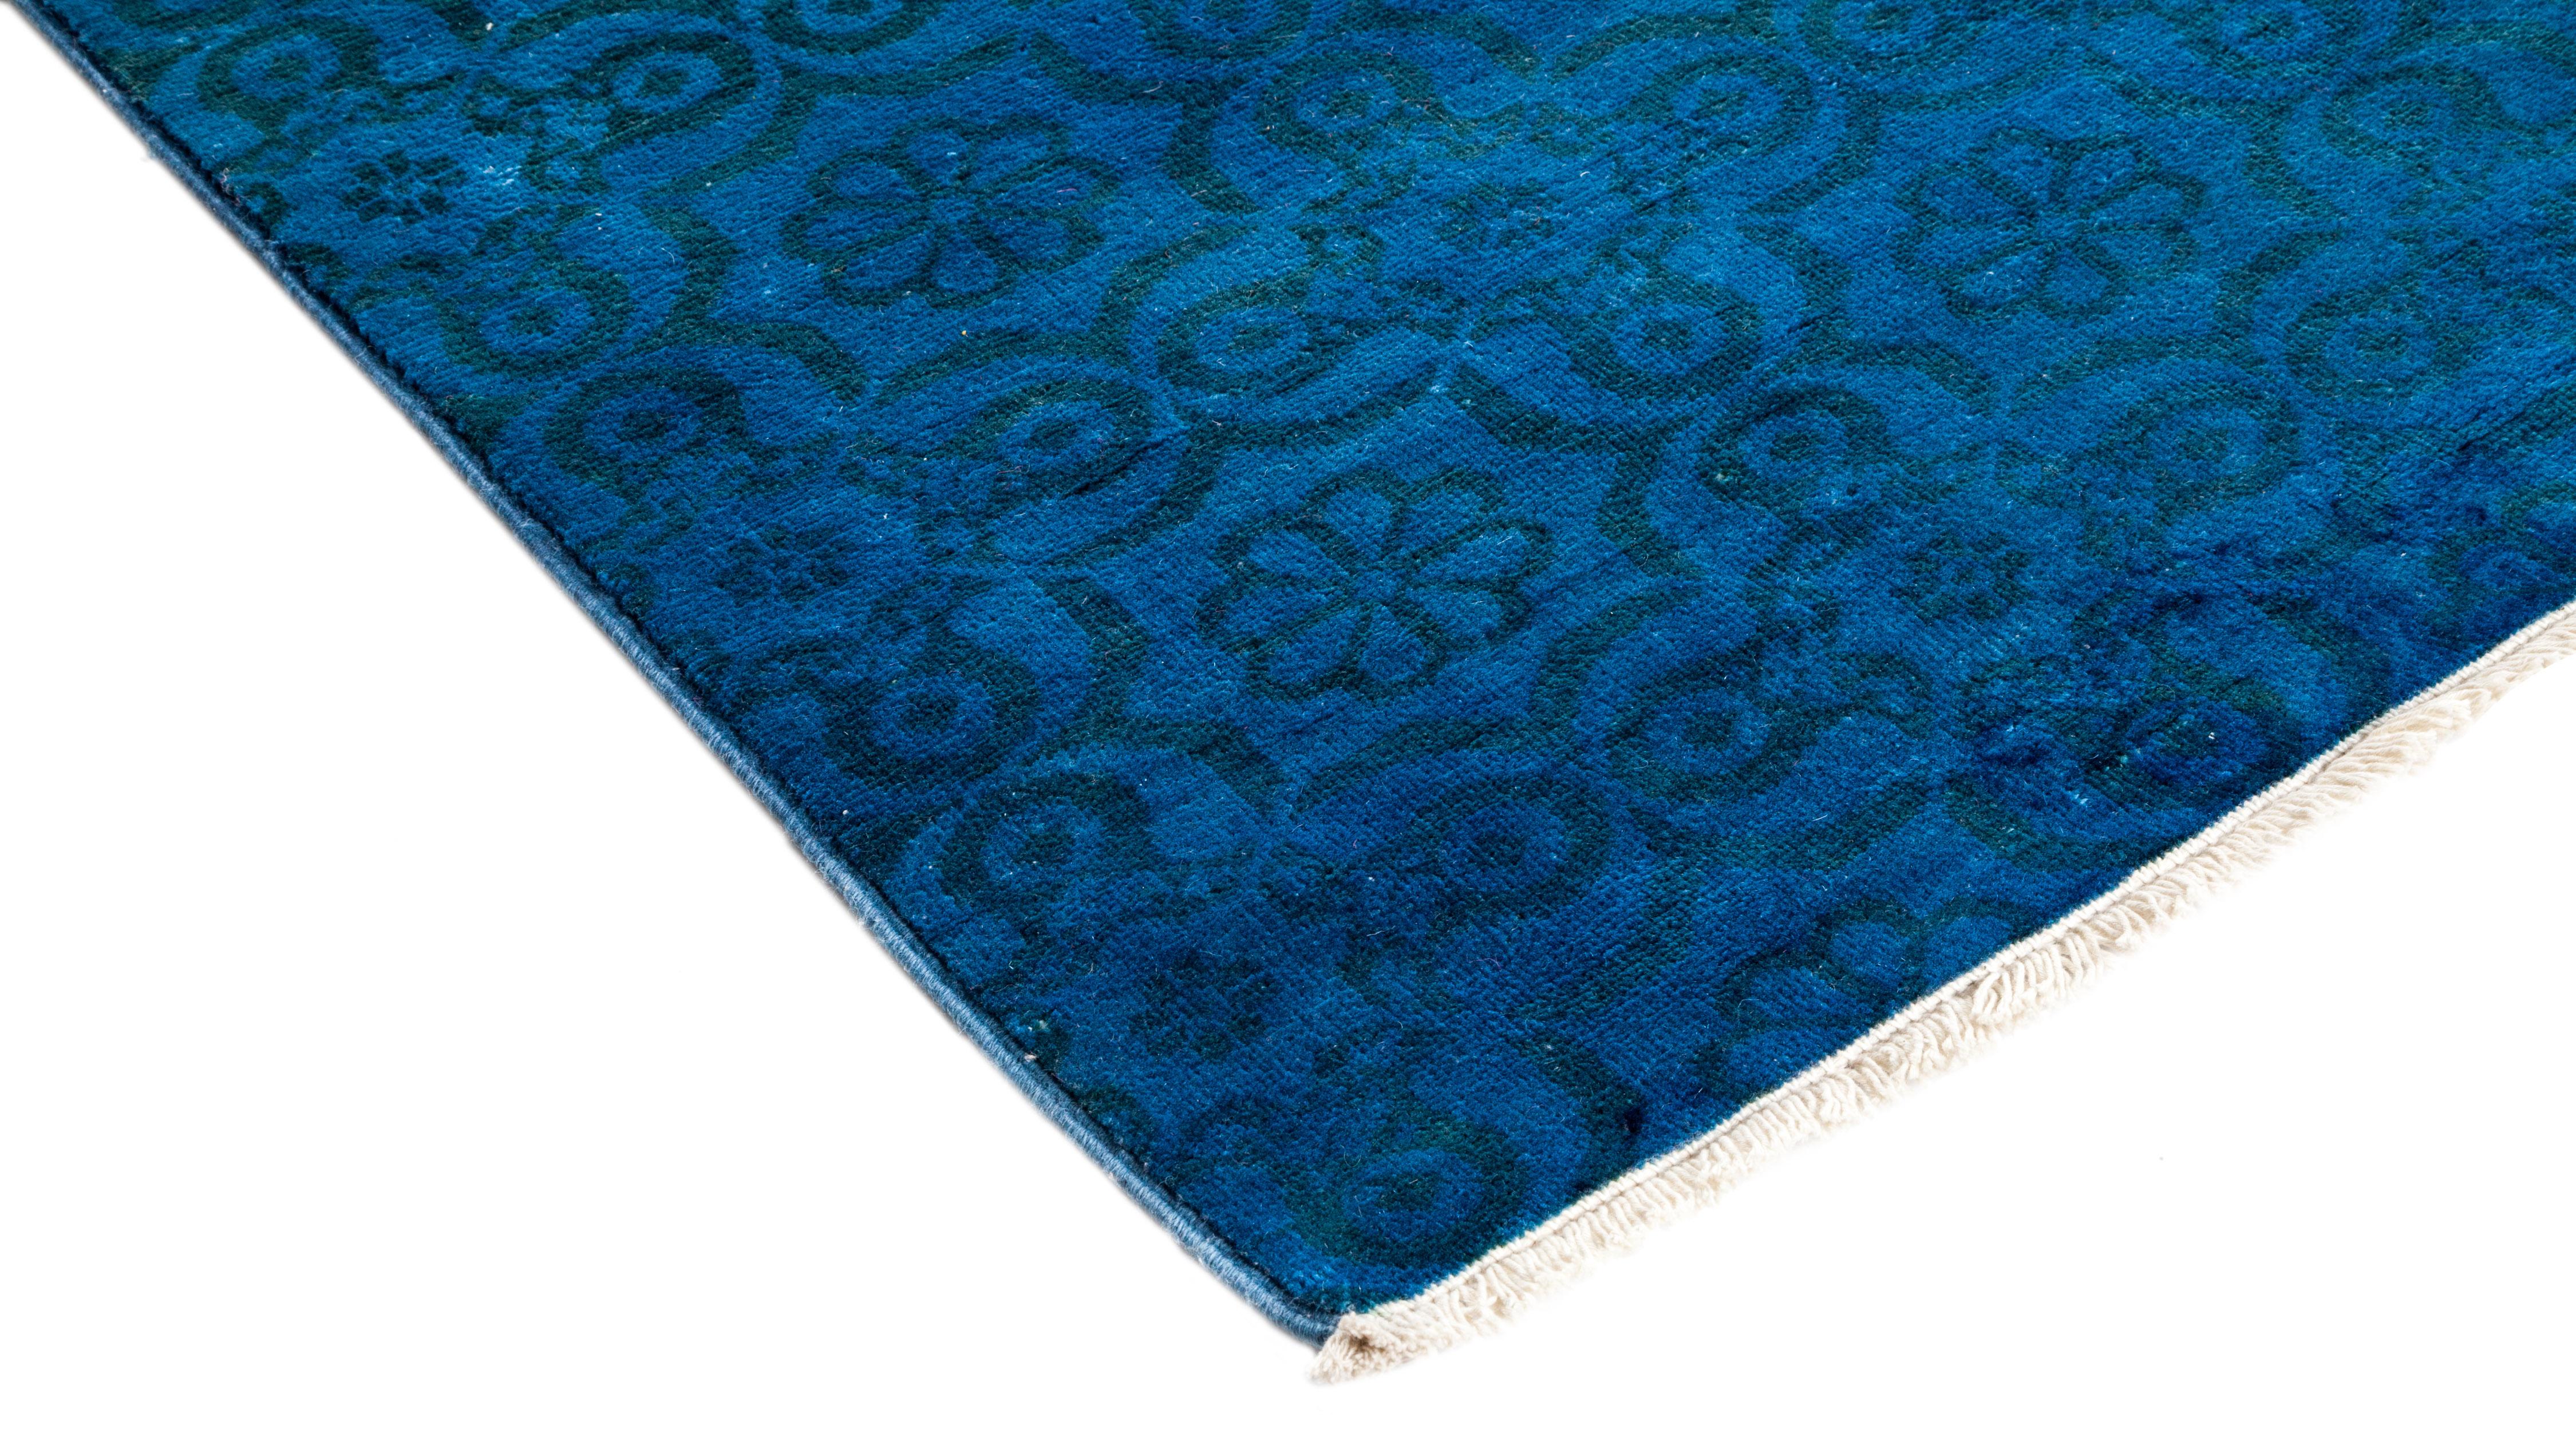 Color: Blue, made in Pakistan. 100% wool. The colorful collection epitomizes Classic with a twist: traditional patterns overdyed in brilliant color. Each hand knotted rug is washed in a 100% natural botanical dye that reveals hidden nuances in the